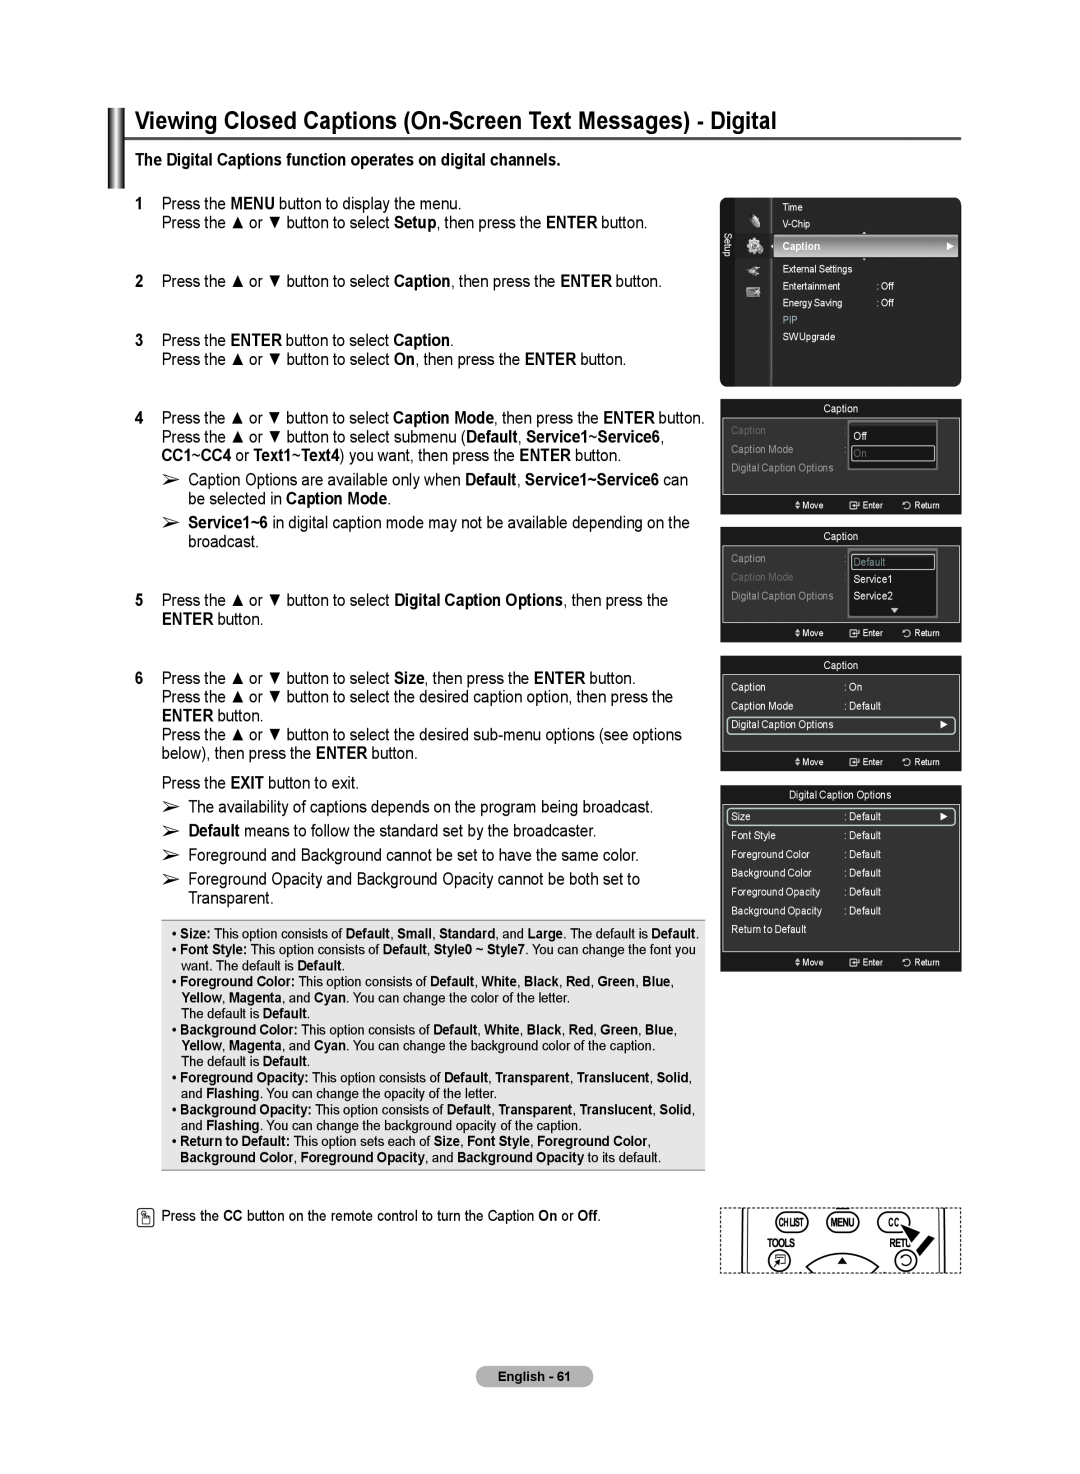 Samsung 510 user manual Viewing Closed Captions On-Screen Text Messages - Digital 